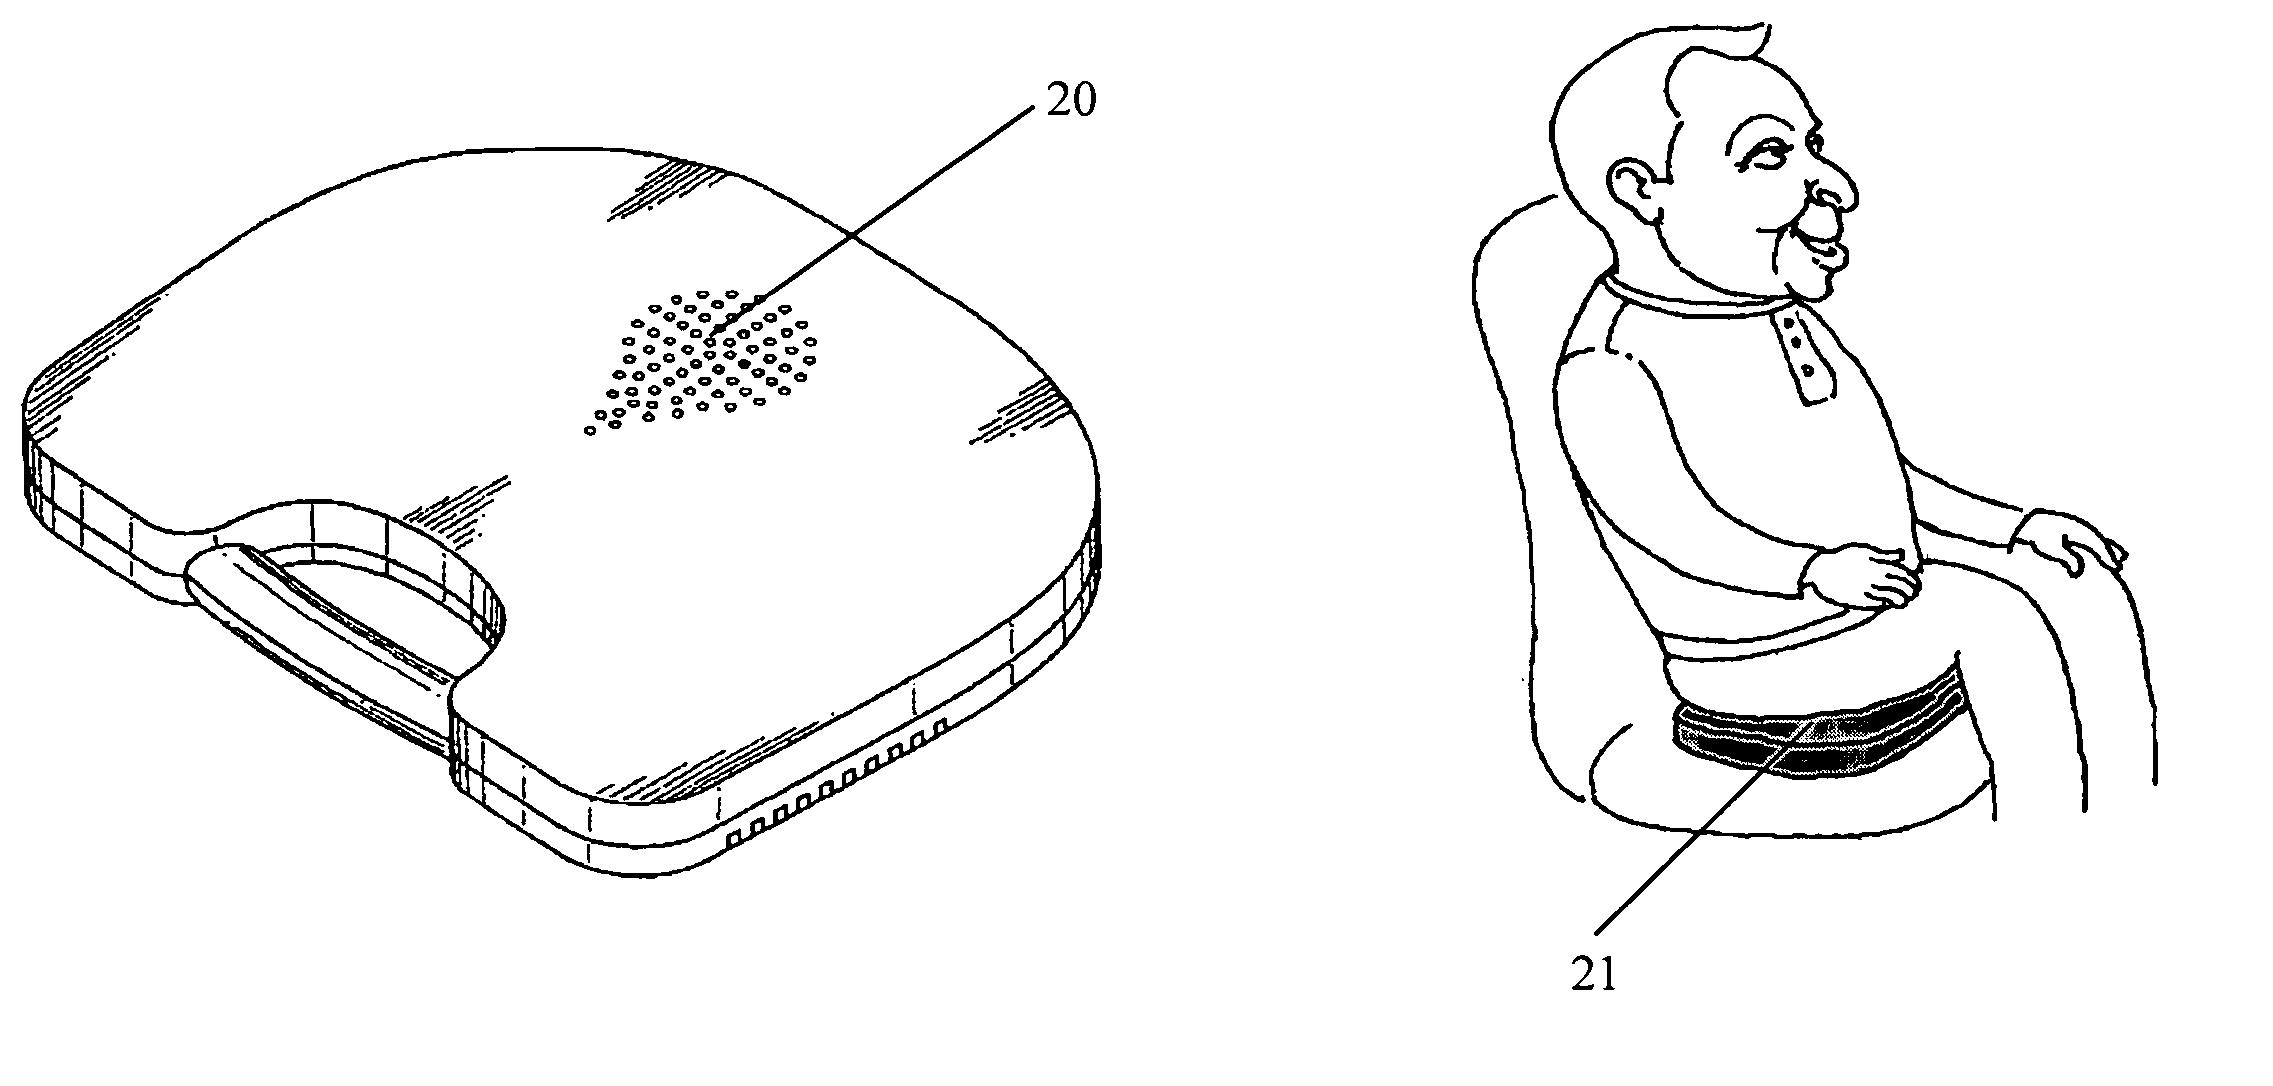 Apparatus for inducing energies of alpha rhythm to the human body